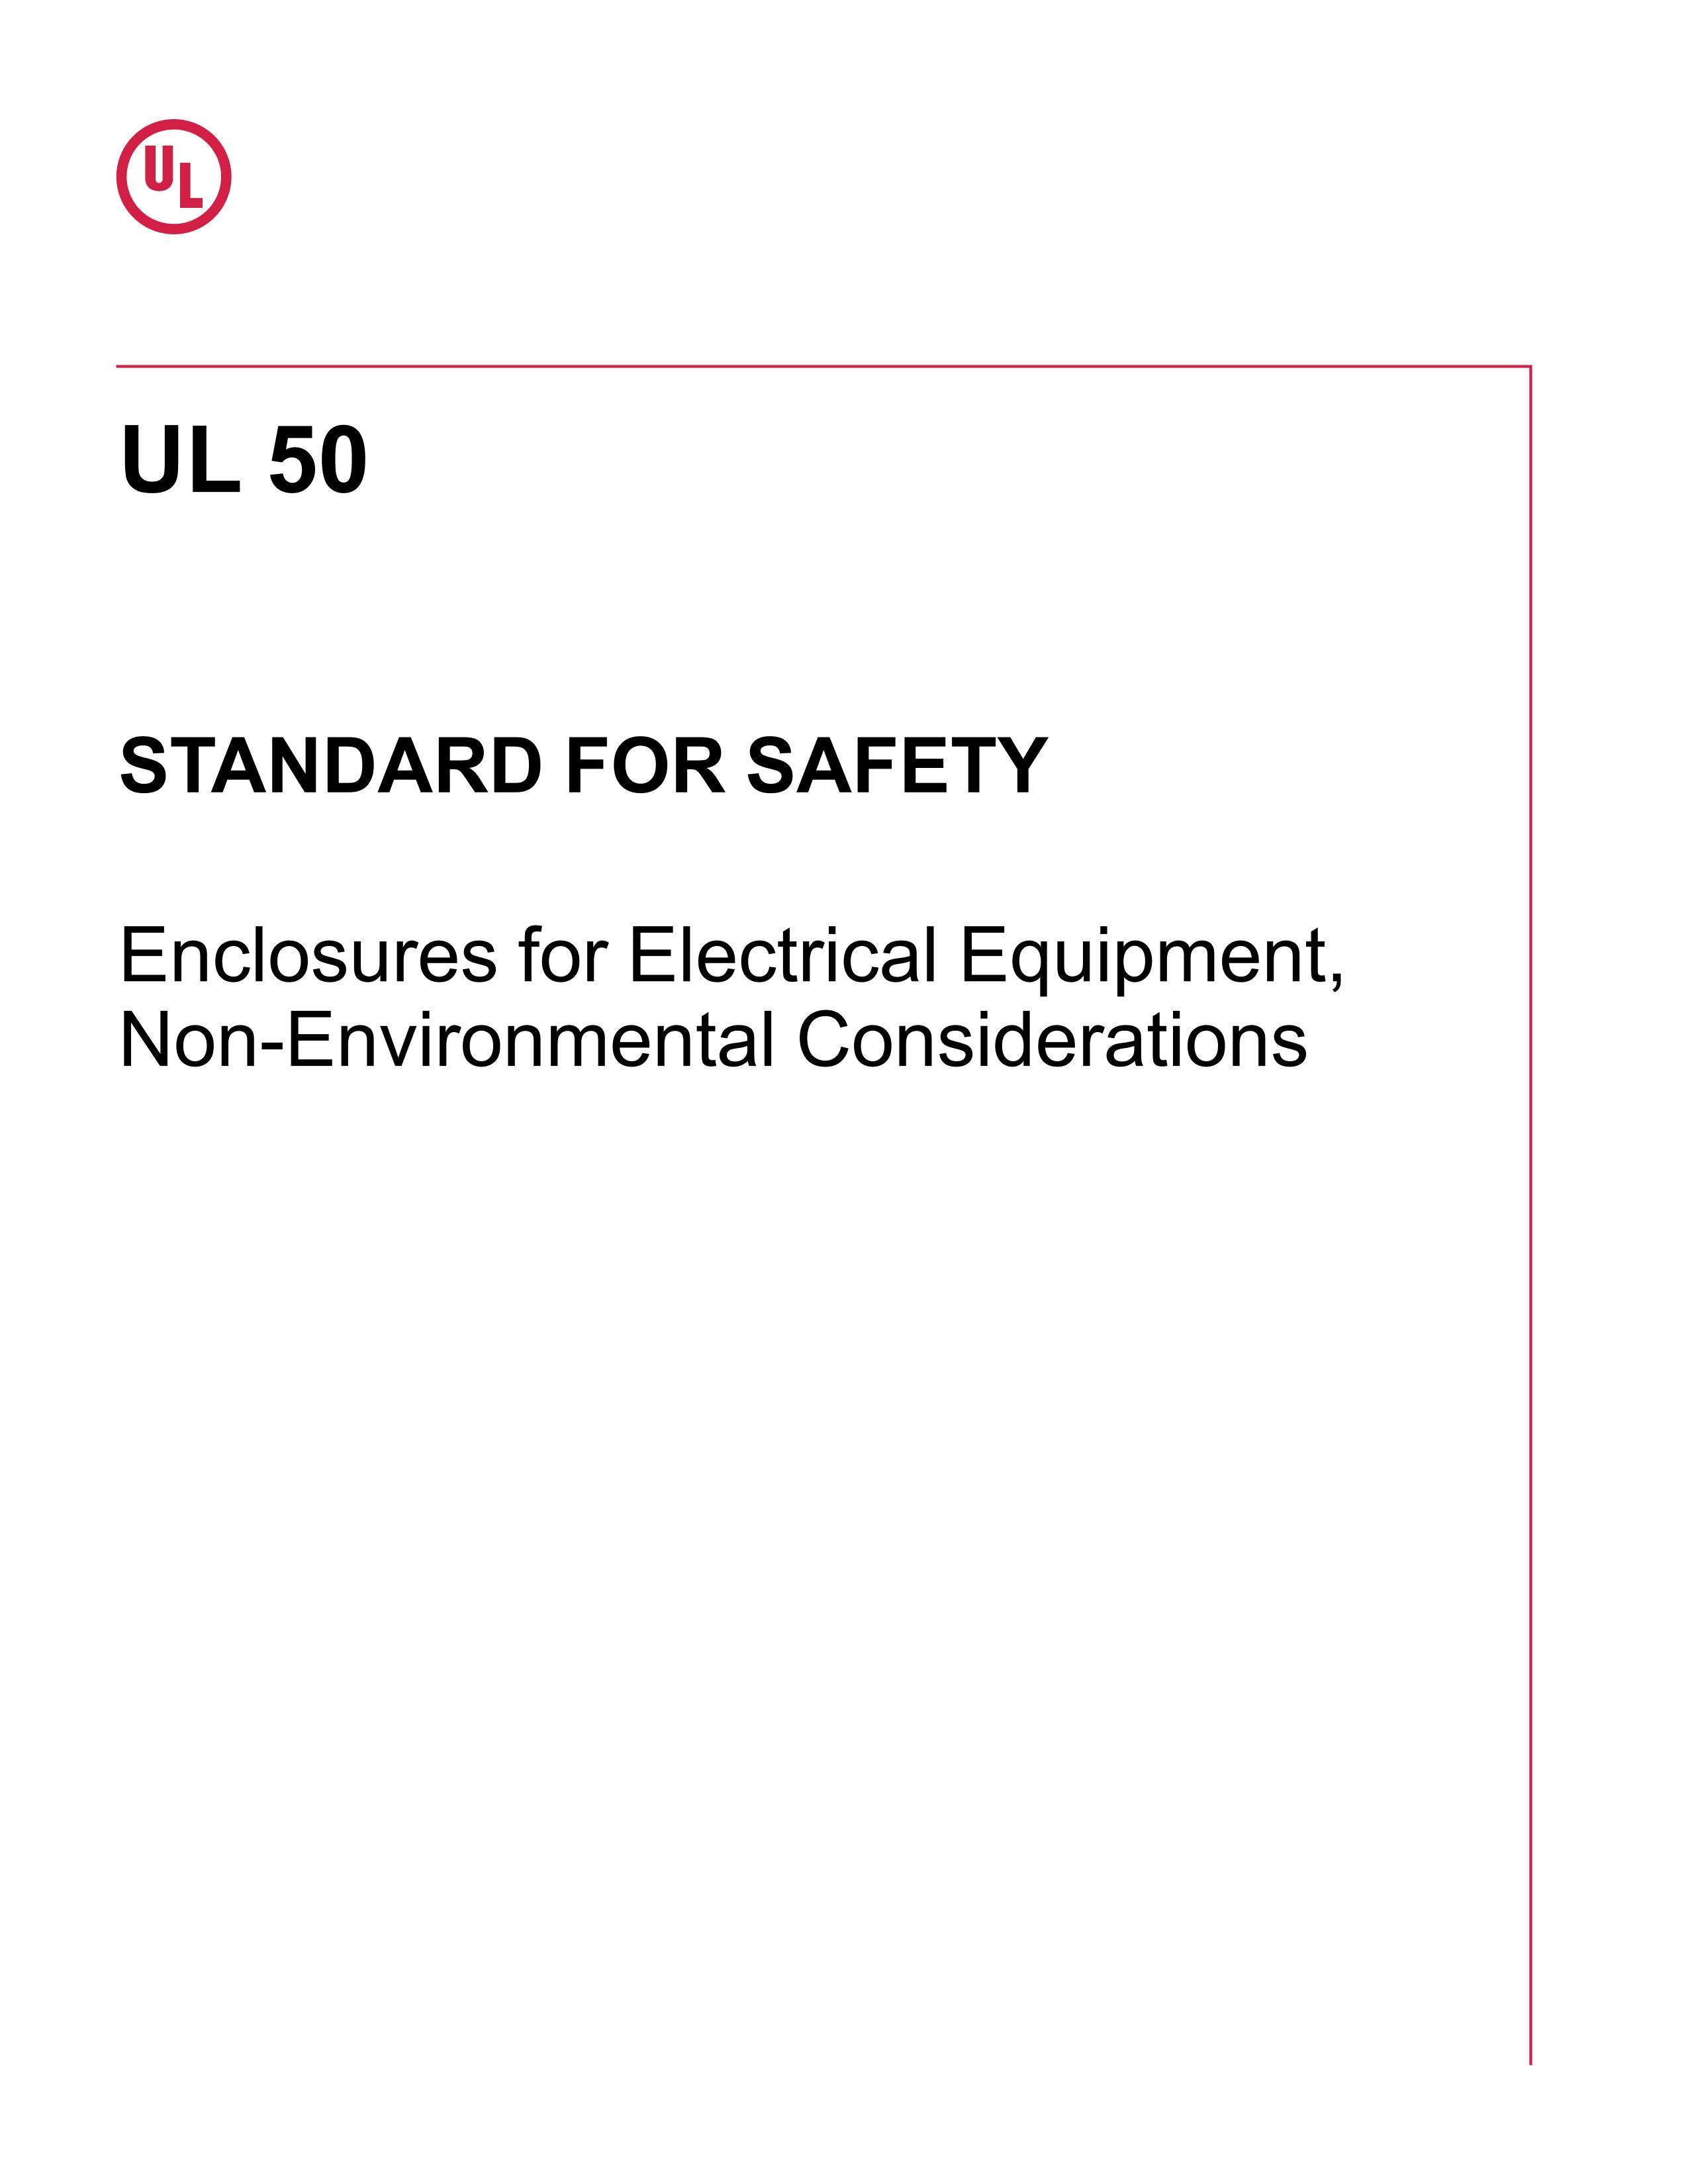 UL 50-2020 Enclosures for Electrical Equipment, Non-Environmental Considerations.pdf1ҳ